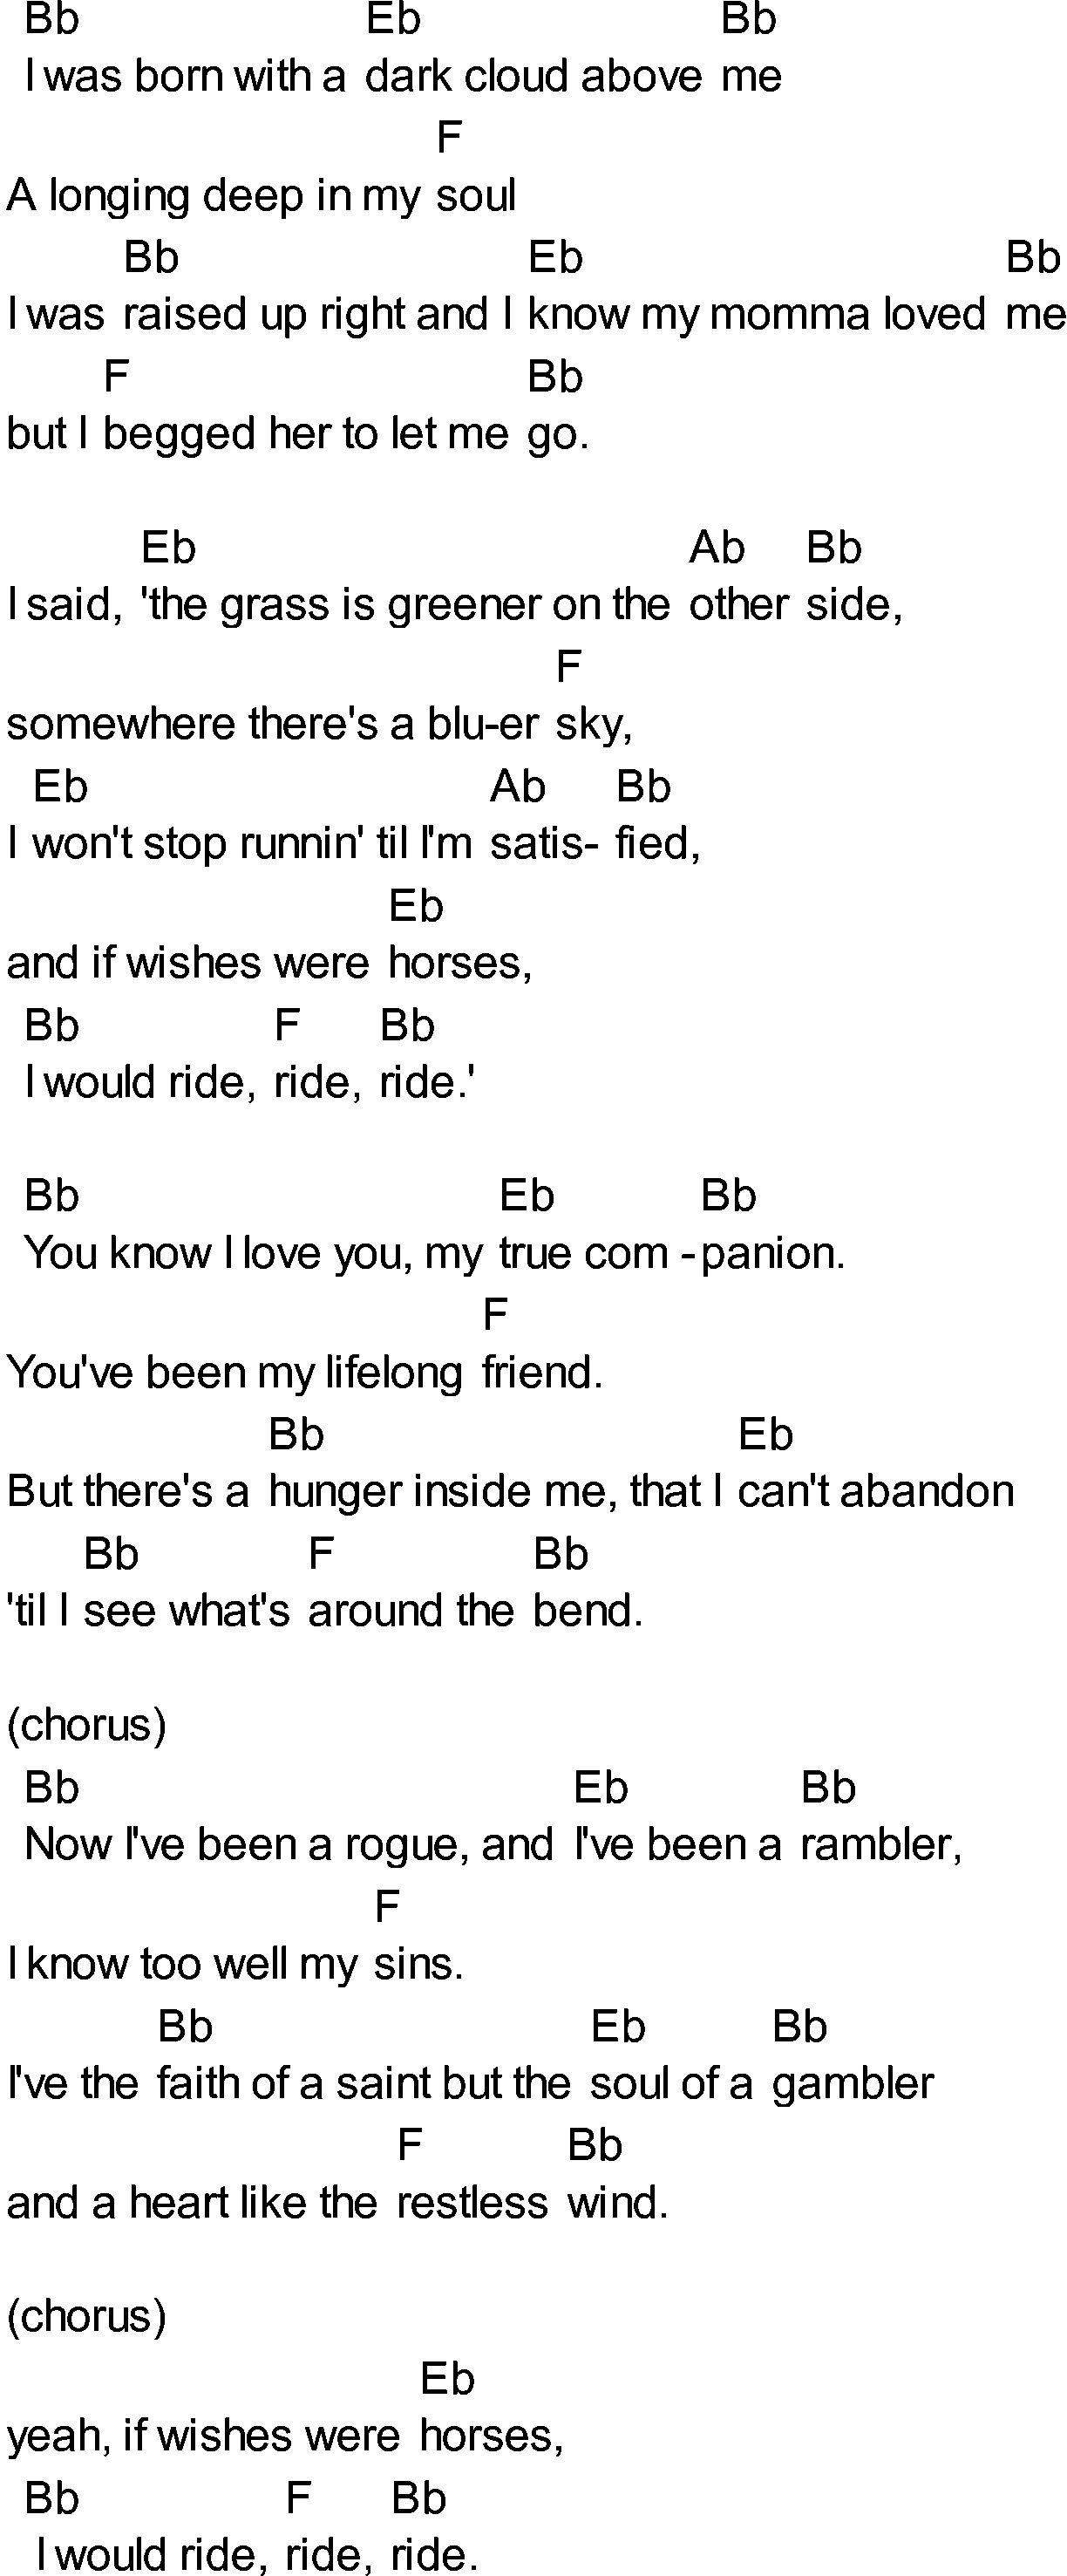 Bluegrass songs with chords - If Wishes Were Horses